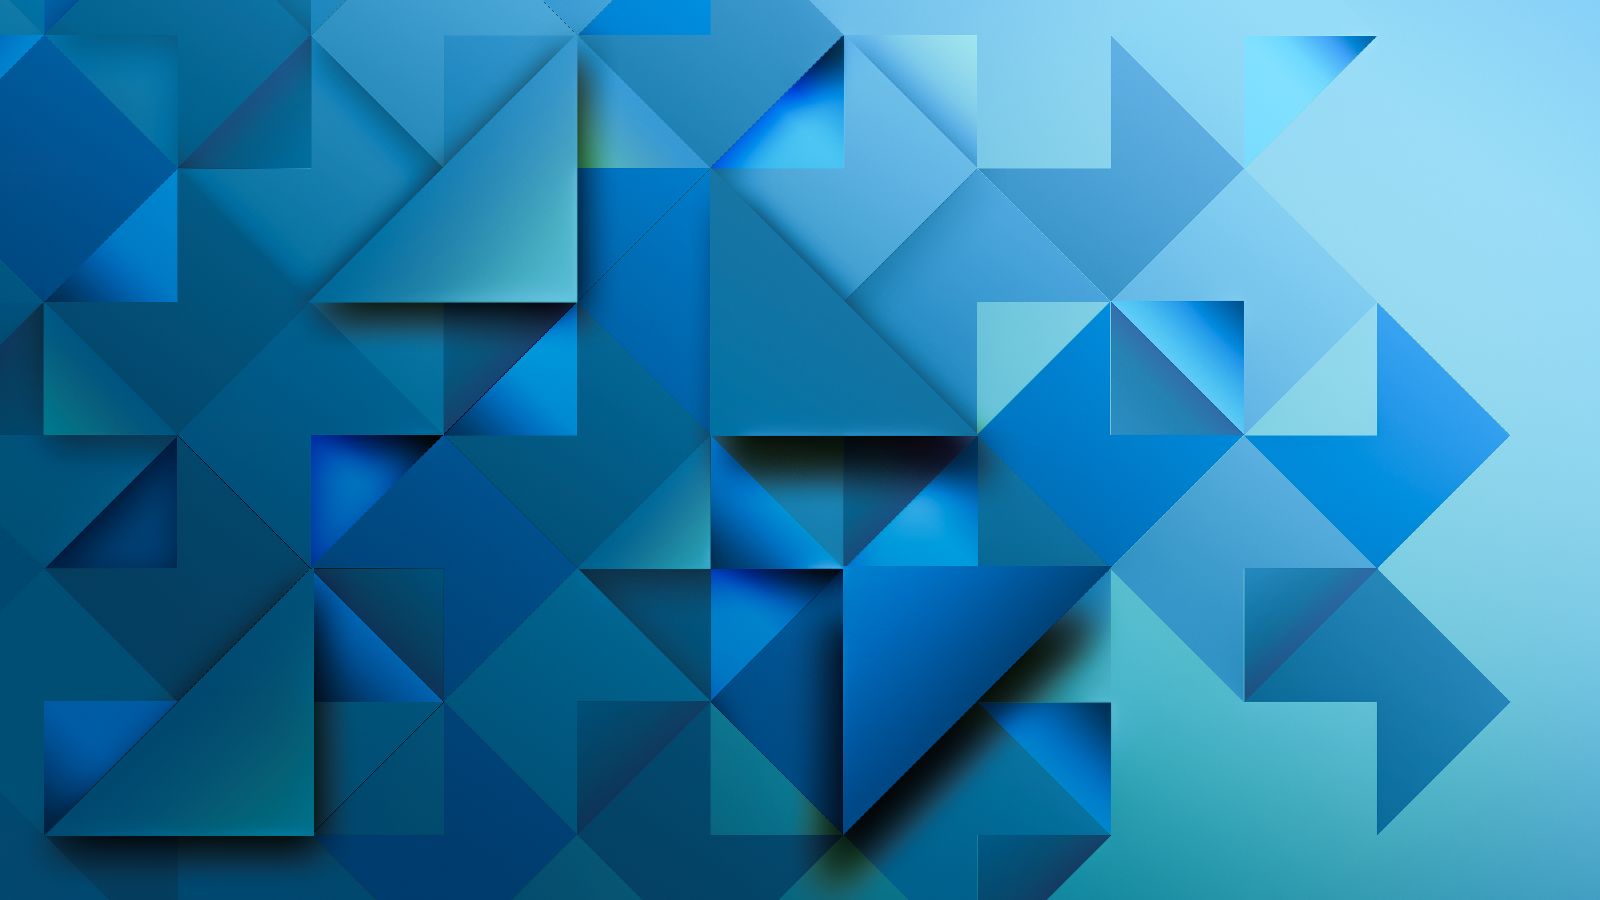 A diagonal, fading grid of boxes and triangles, with varying shades of dark blues and light greens. The shapes are irregular in patterns